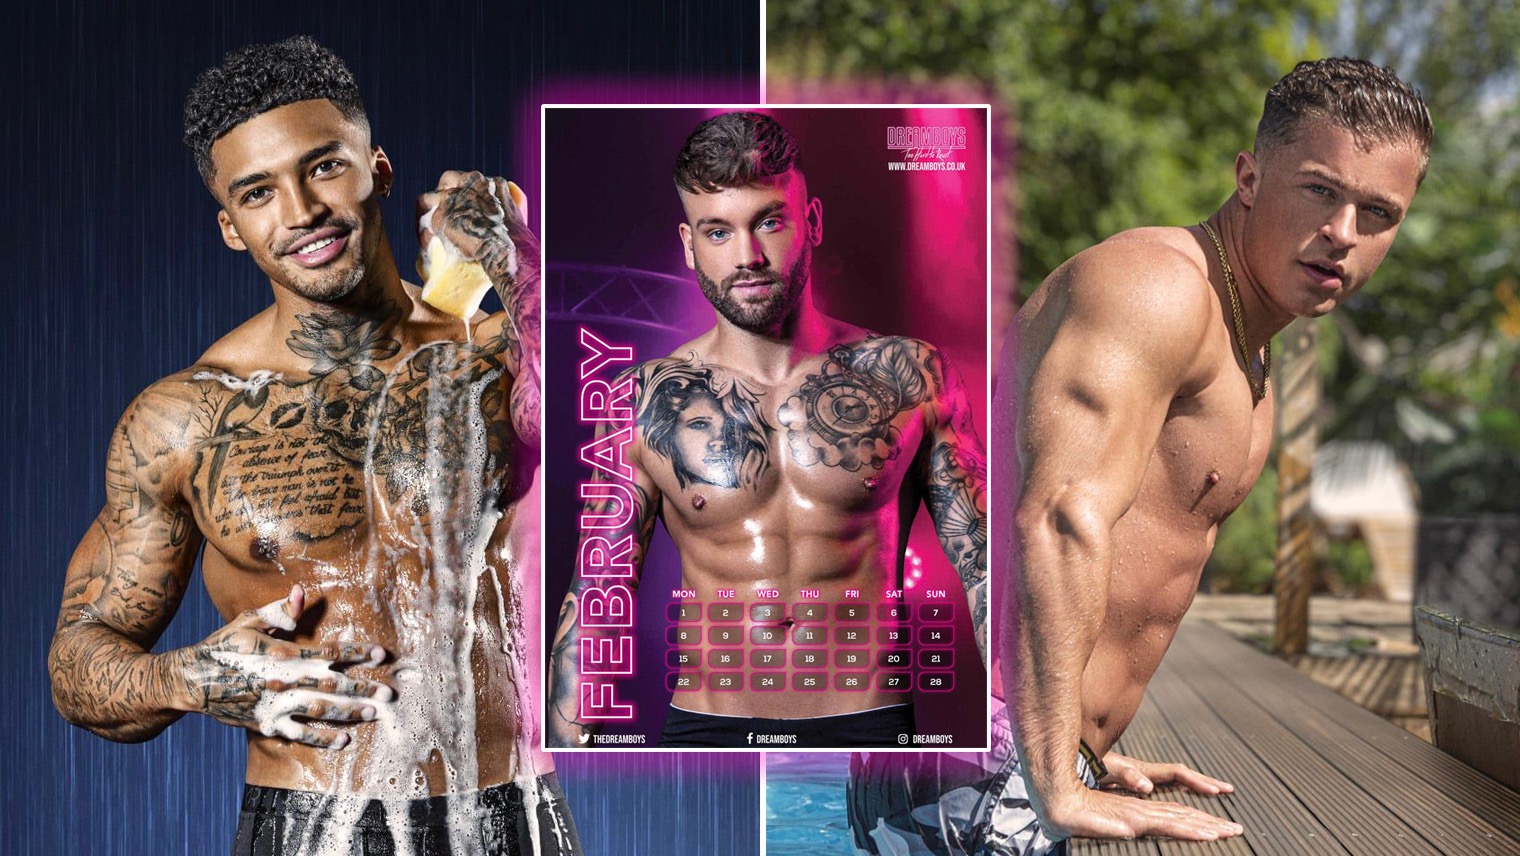 Male Strippers | Dreamboys 2021 calendars: The perfect gift to give this Christmas